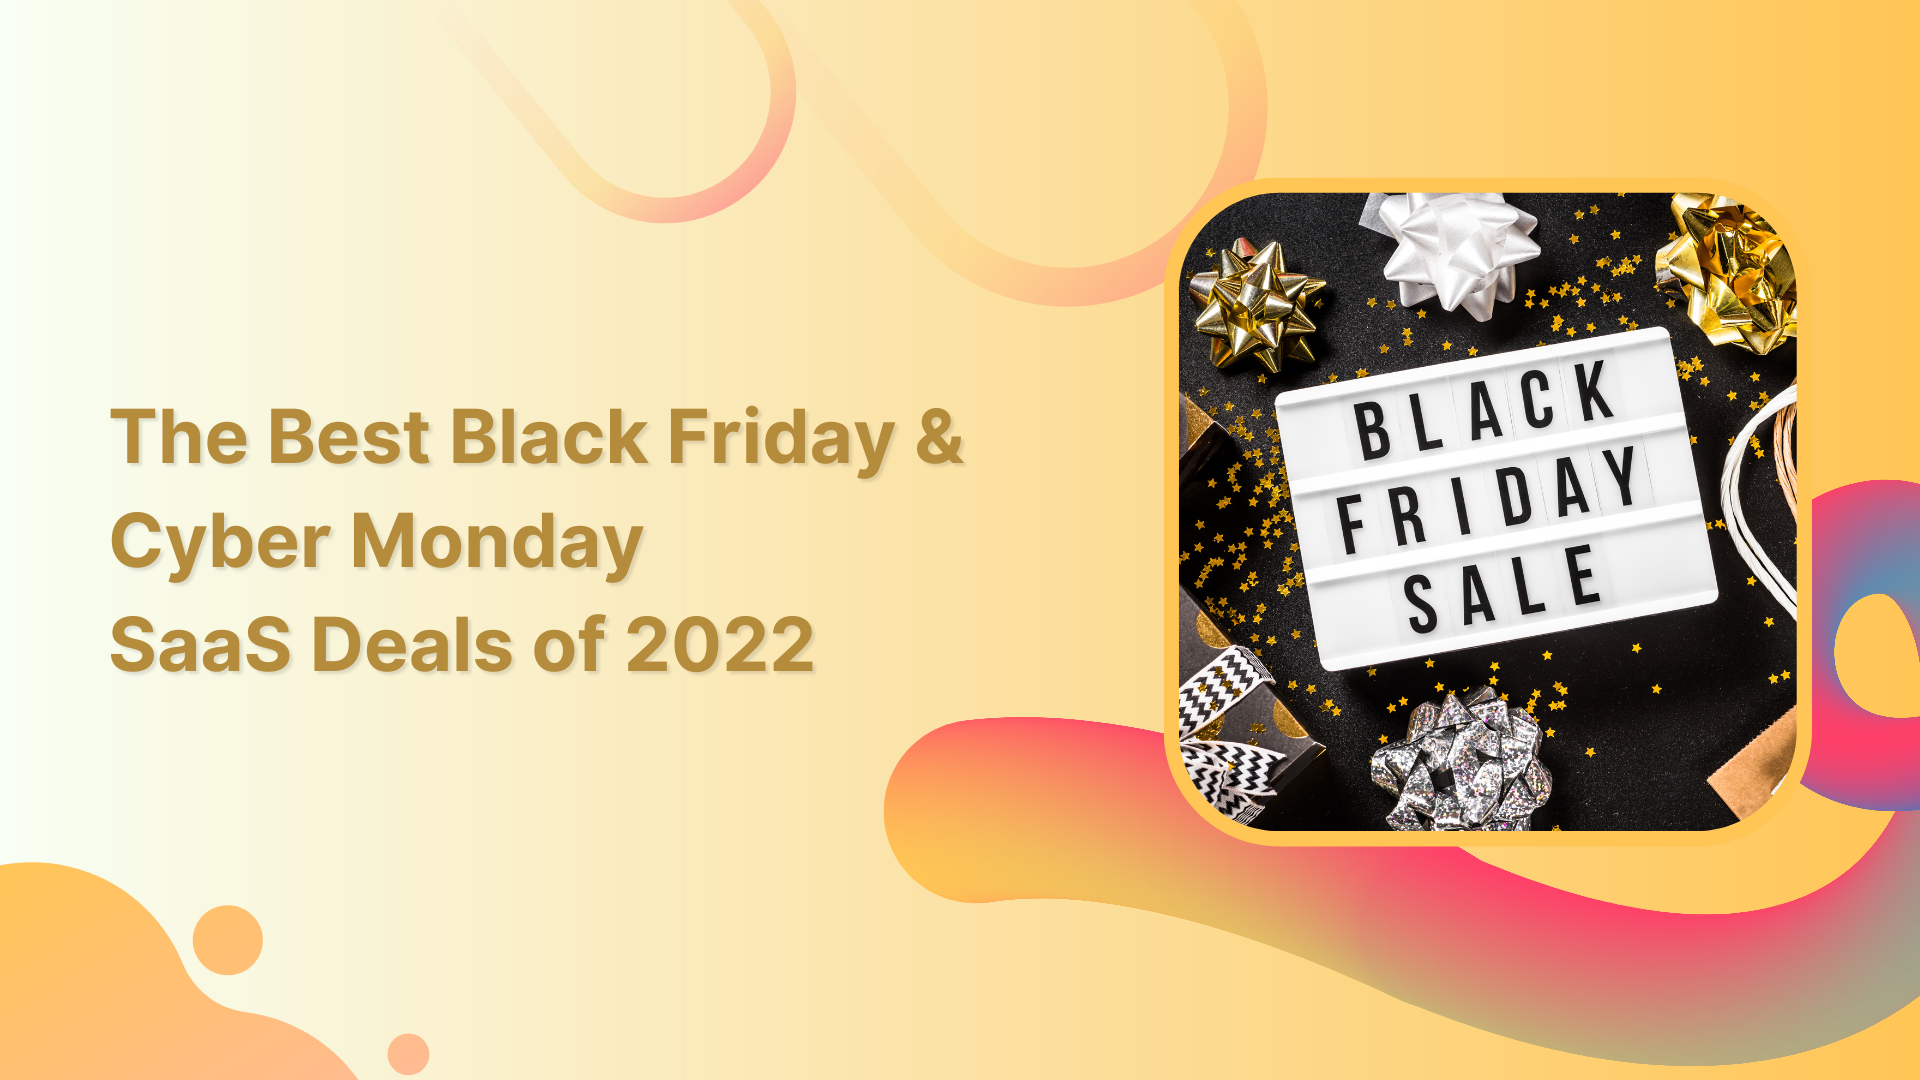 The Best Black Friday & Cyber Monday SaaS Deals of 2022